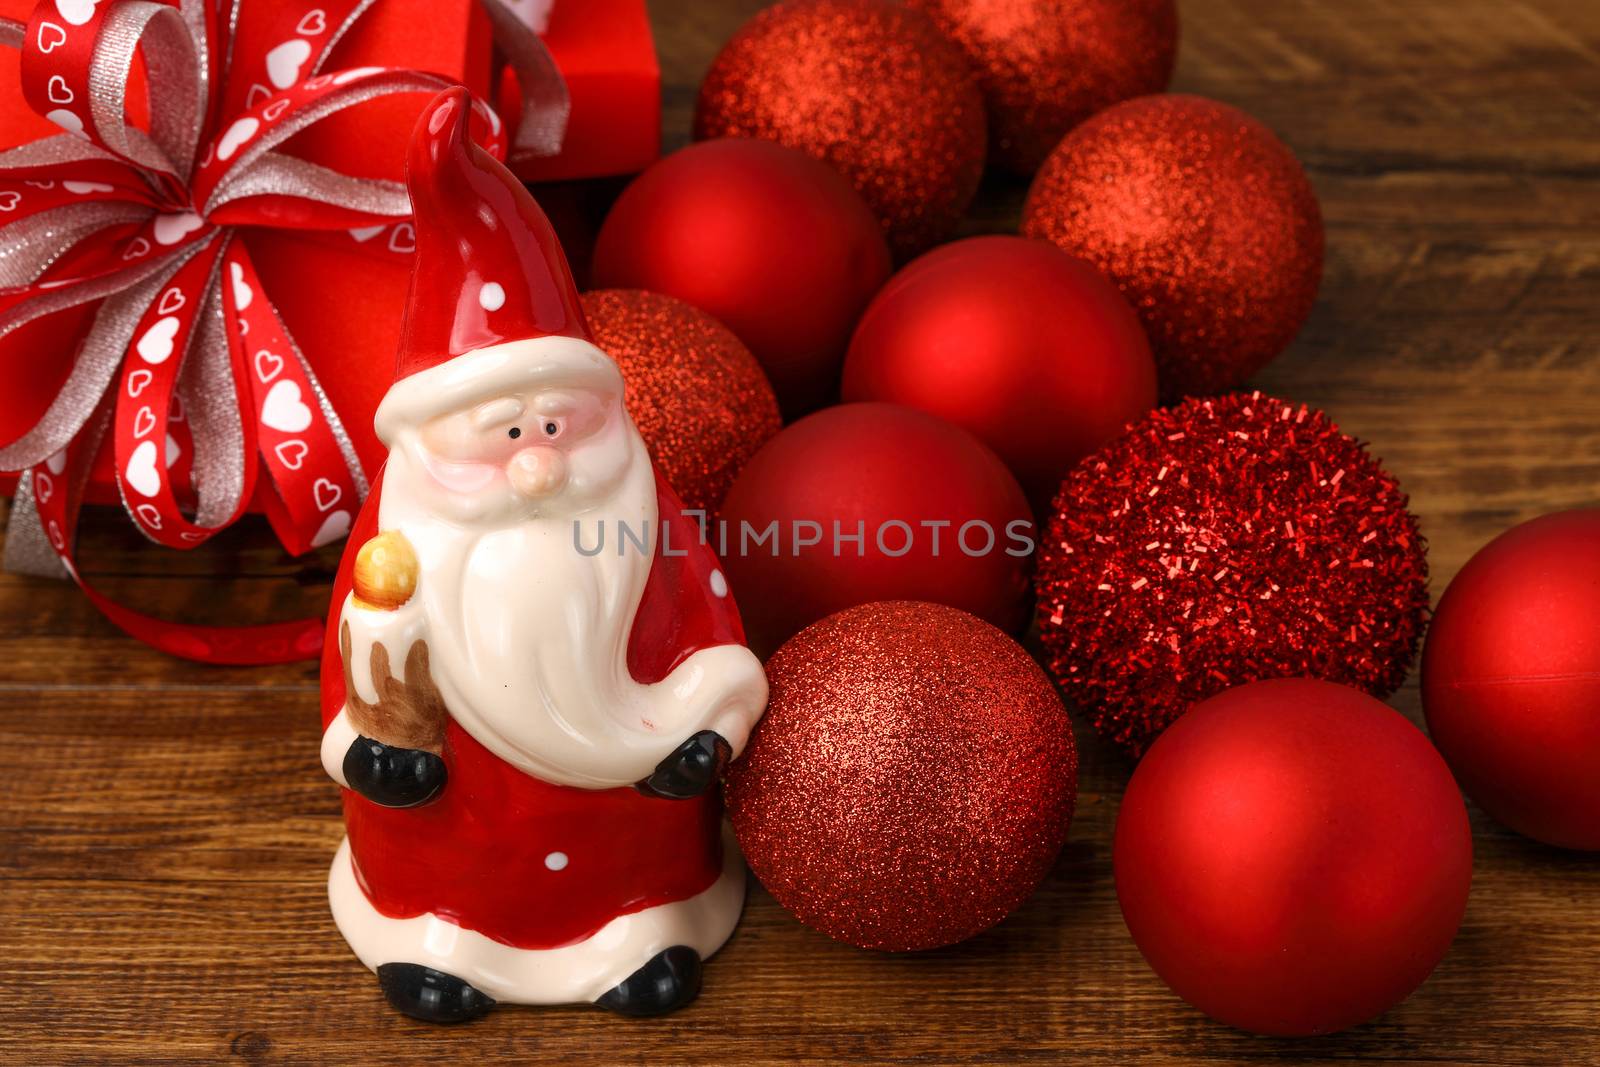 A ceramic Santa with red Christmas baubles and present boxes on wooden background.